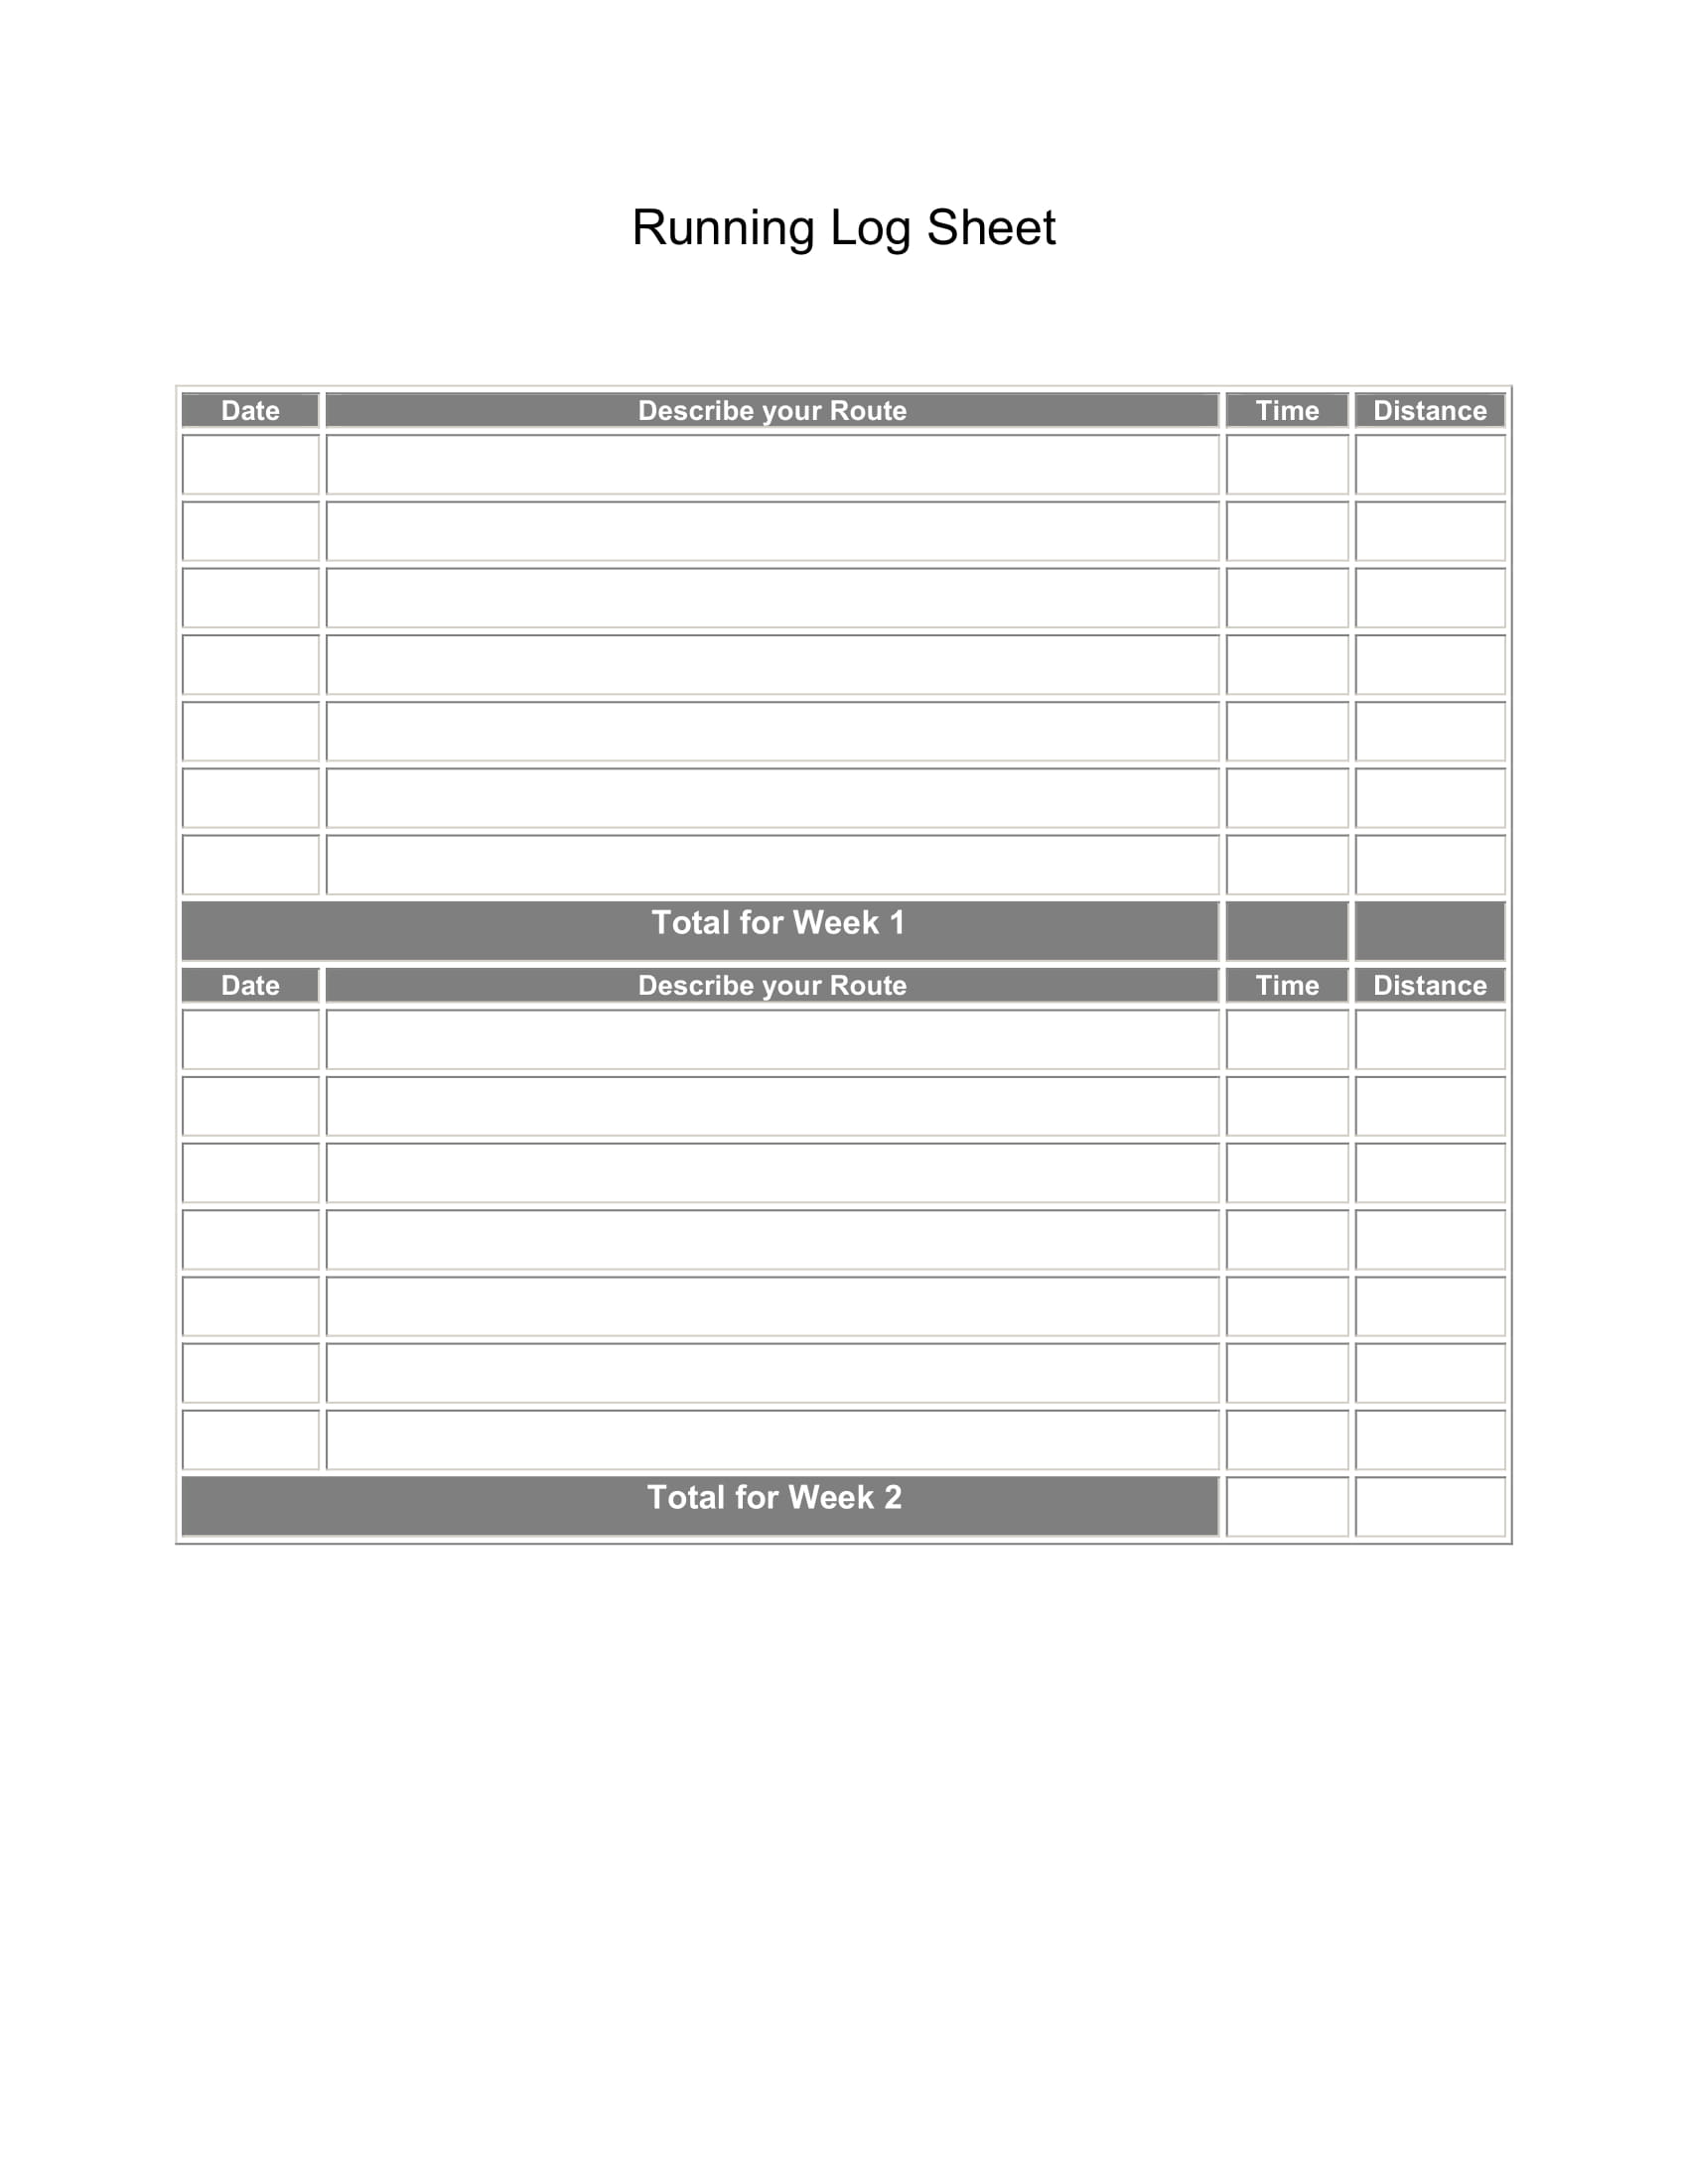 Printable running log sheet you can download in pdf. or word format.